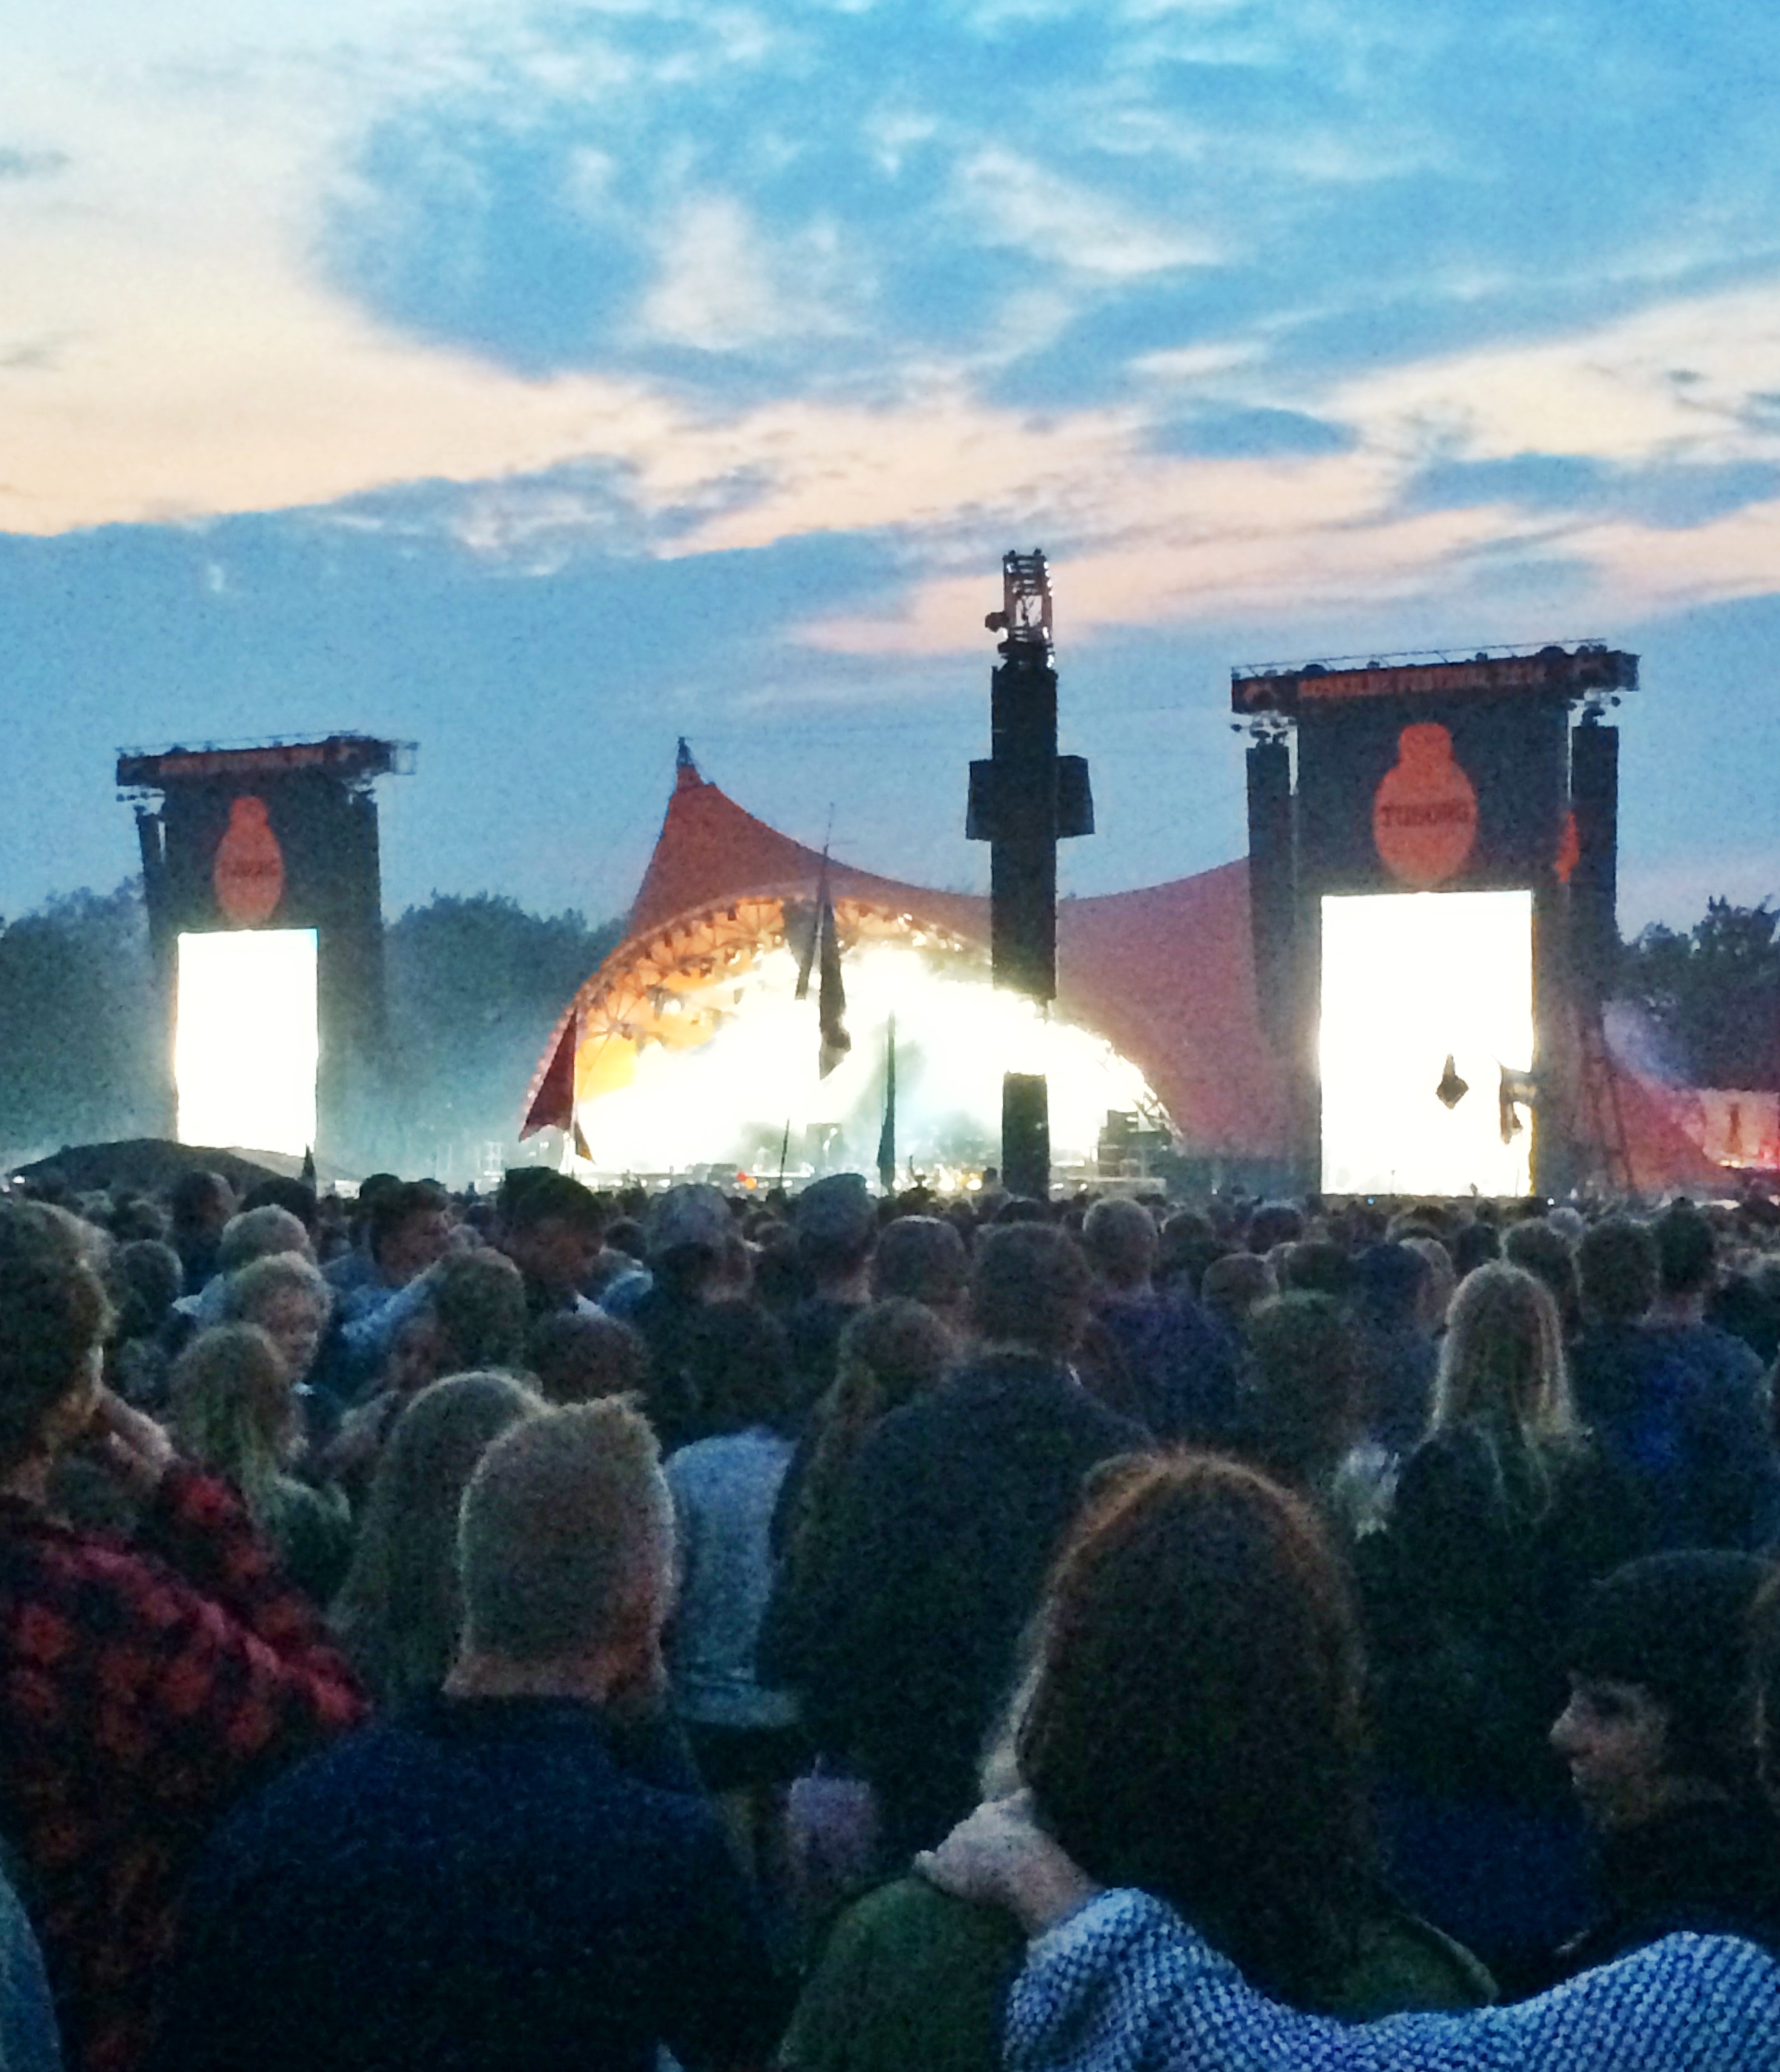 Main stage in the sunset